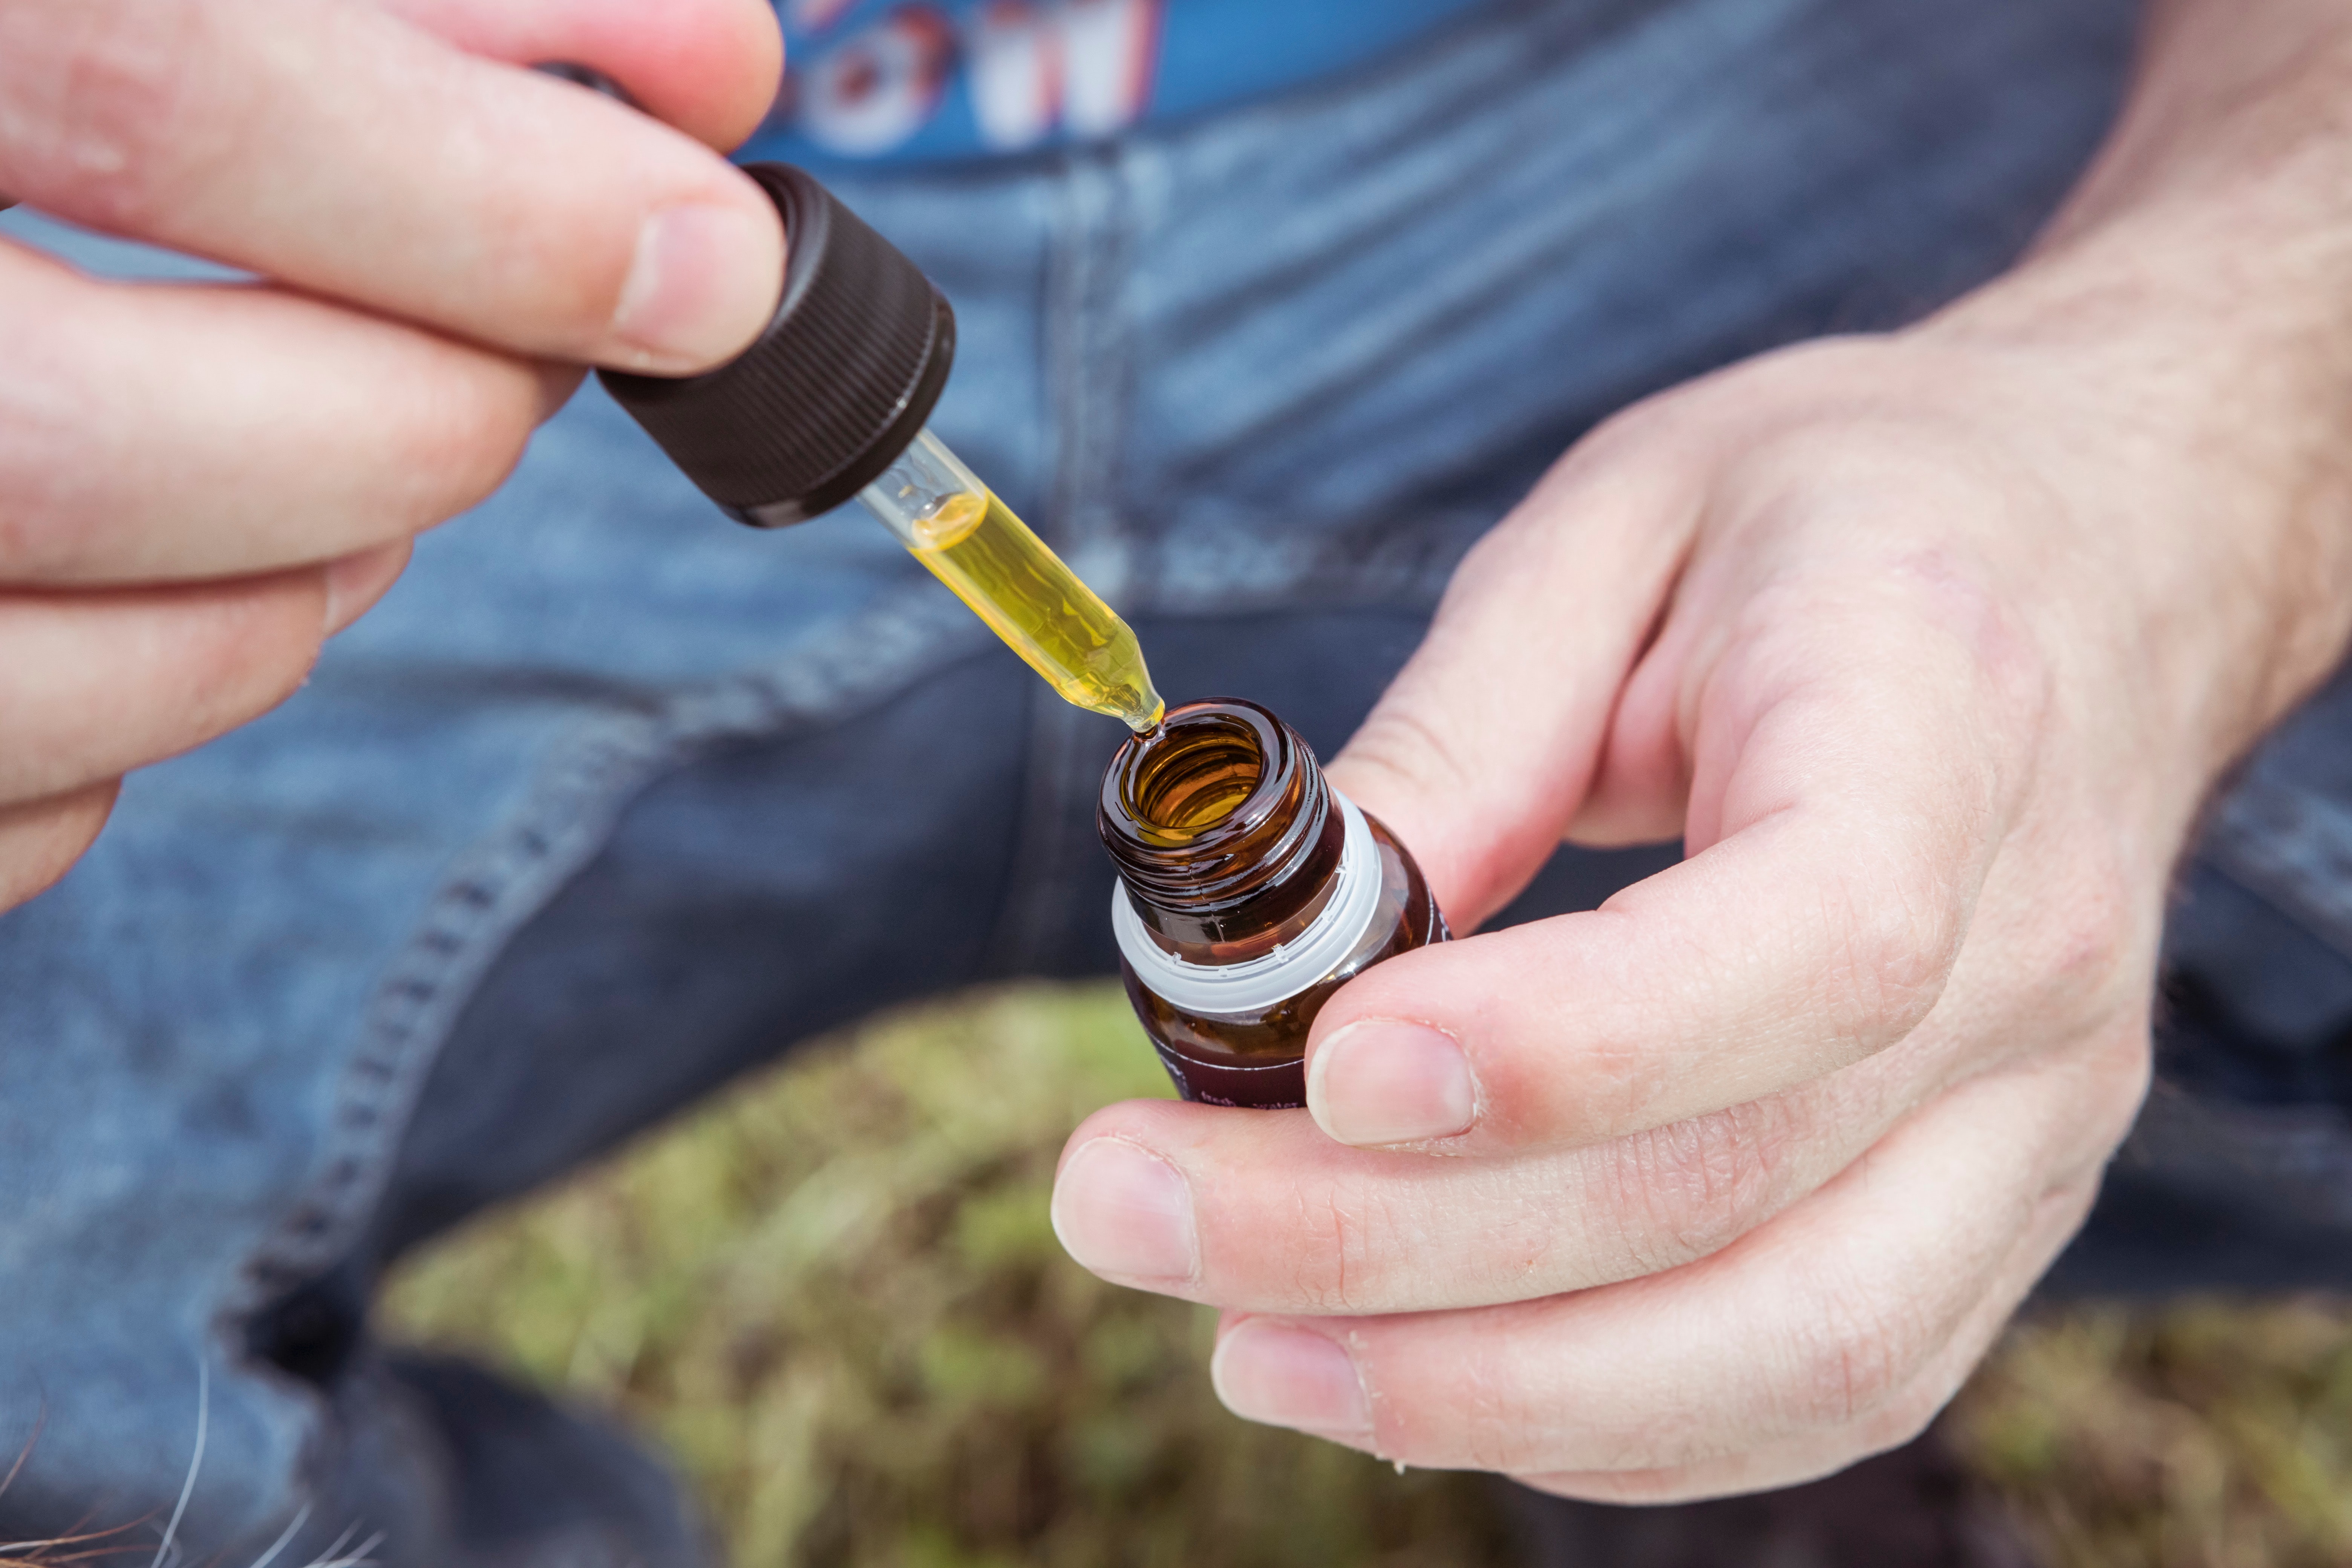 Best Reasons To Use CBD Every Day